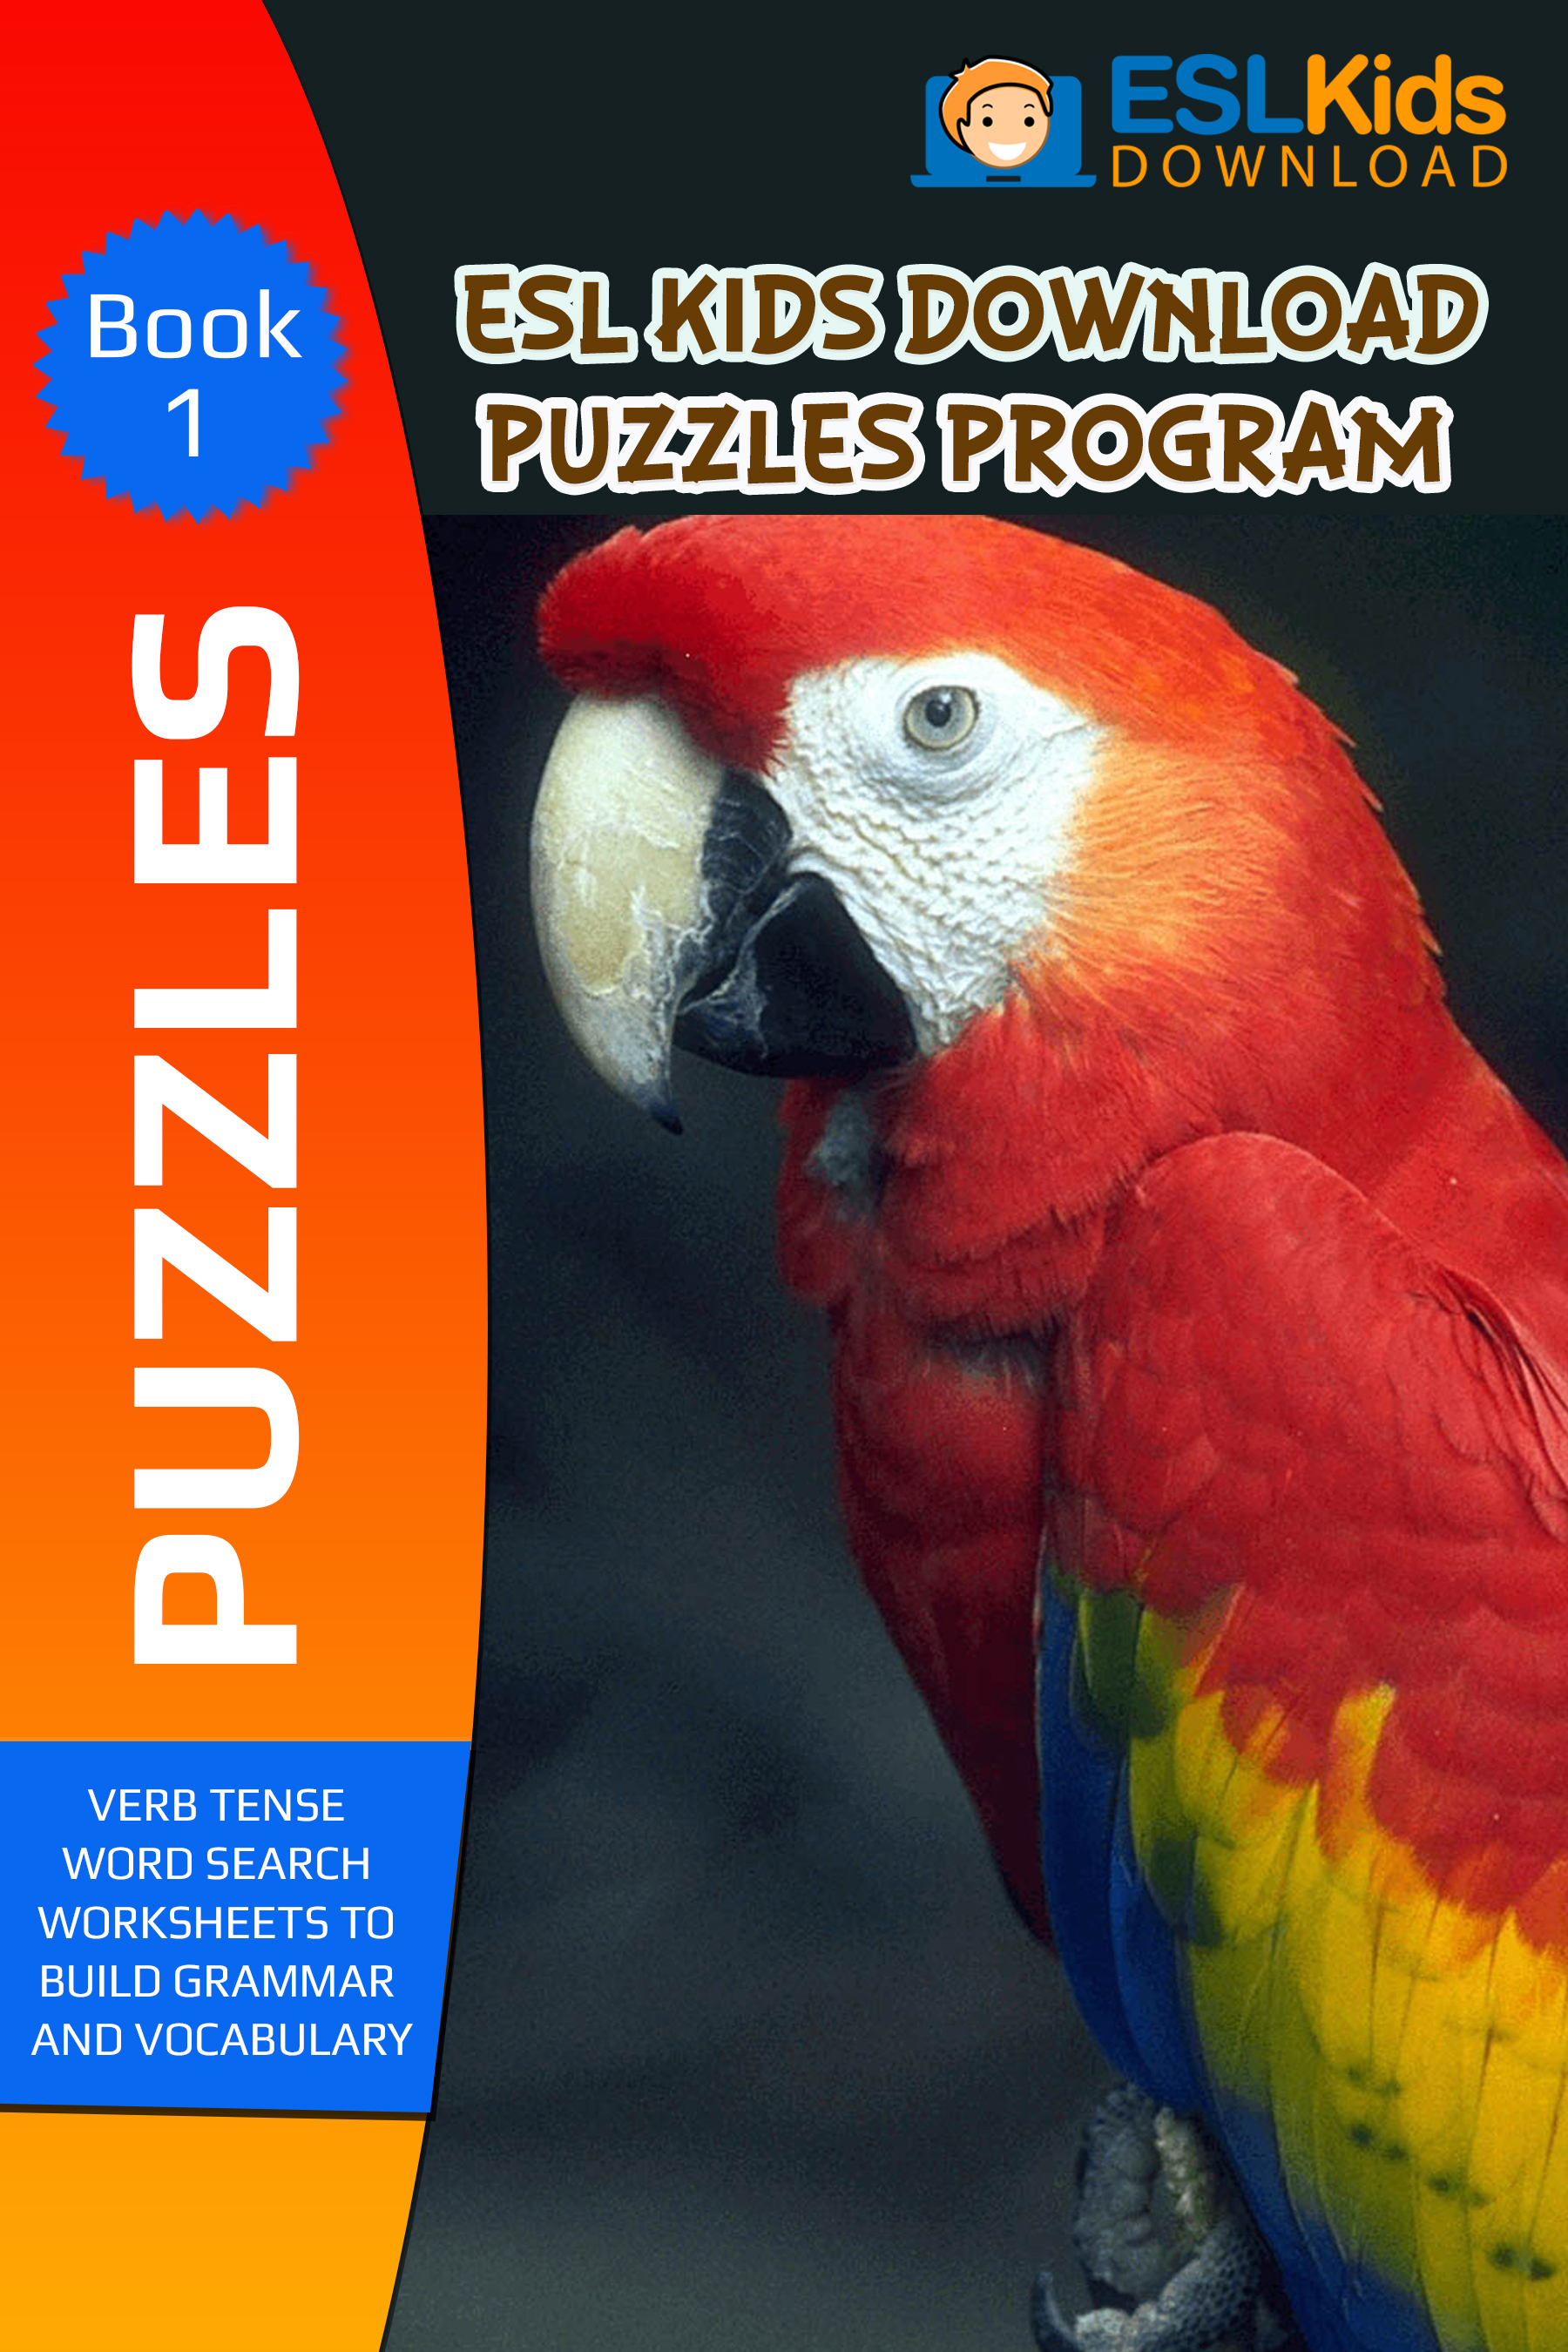 puzzles-word-search-ebook-1